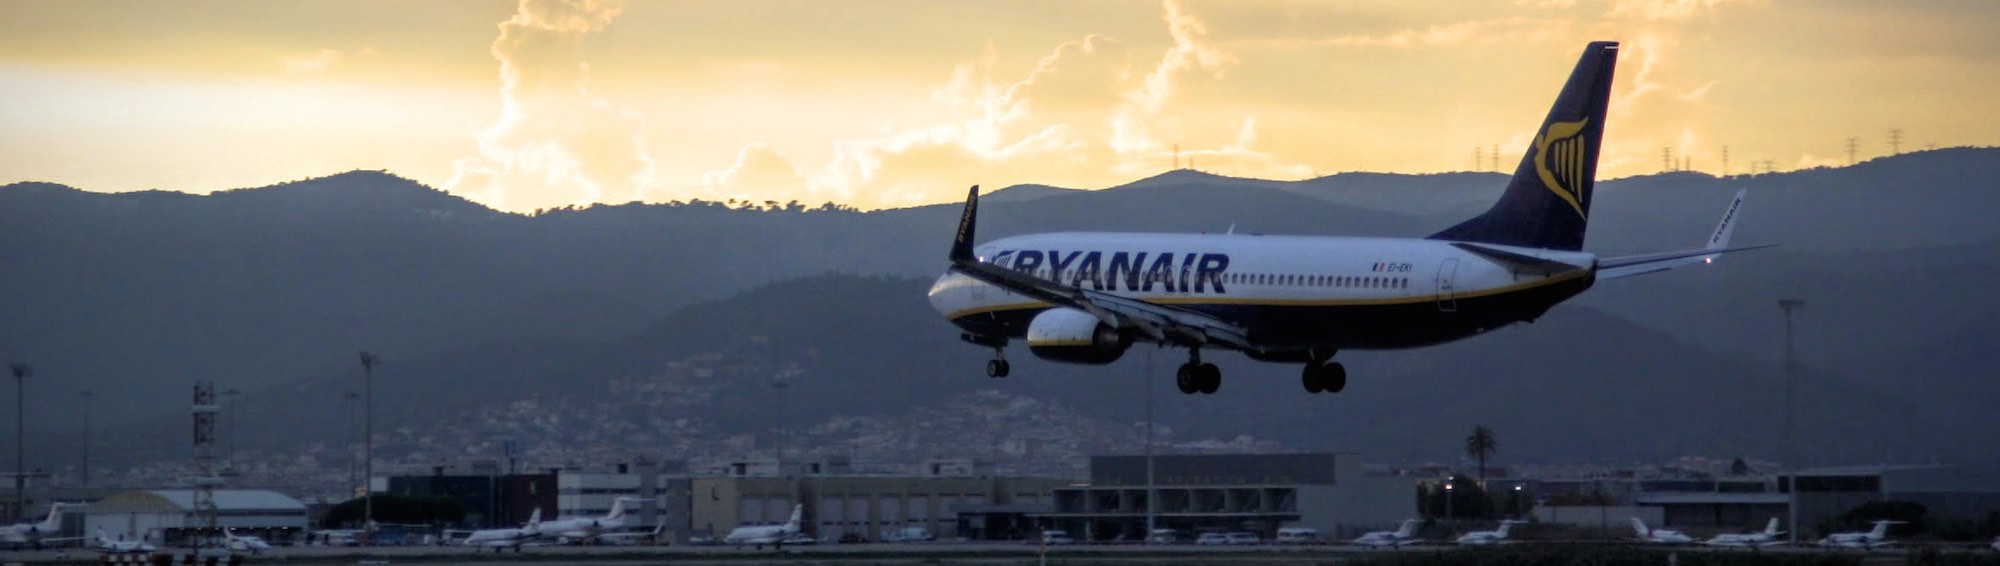 Best time to book flights for London (STN) to Almeria (LEI) flights with Ryanair at AirHint